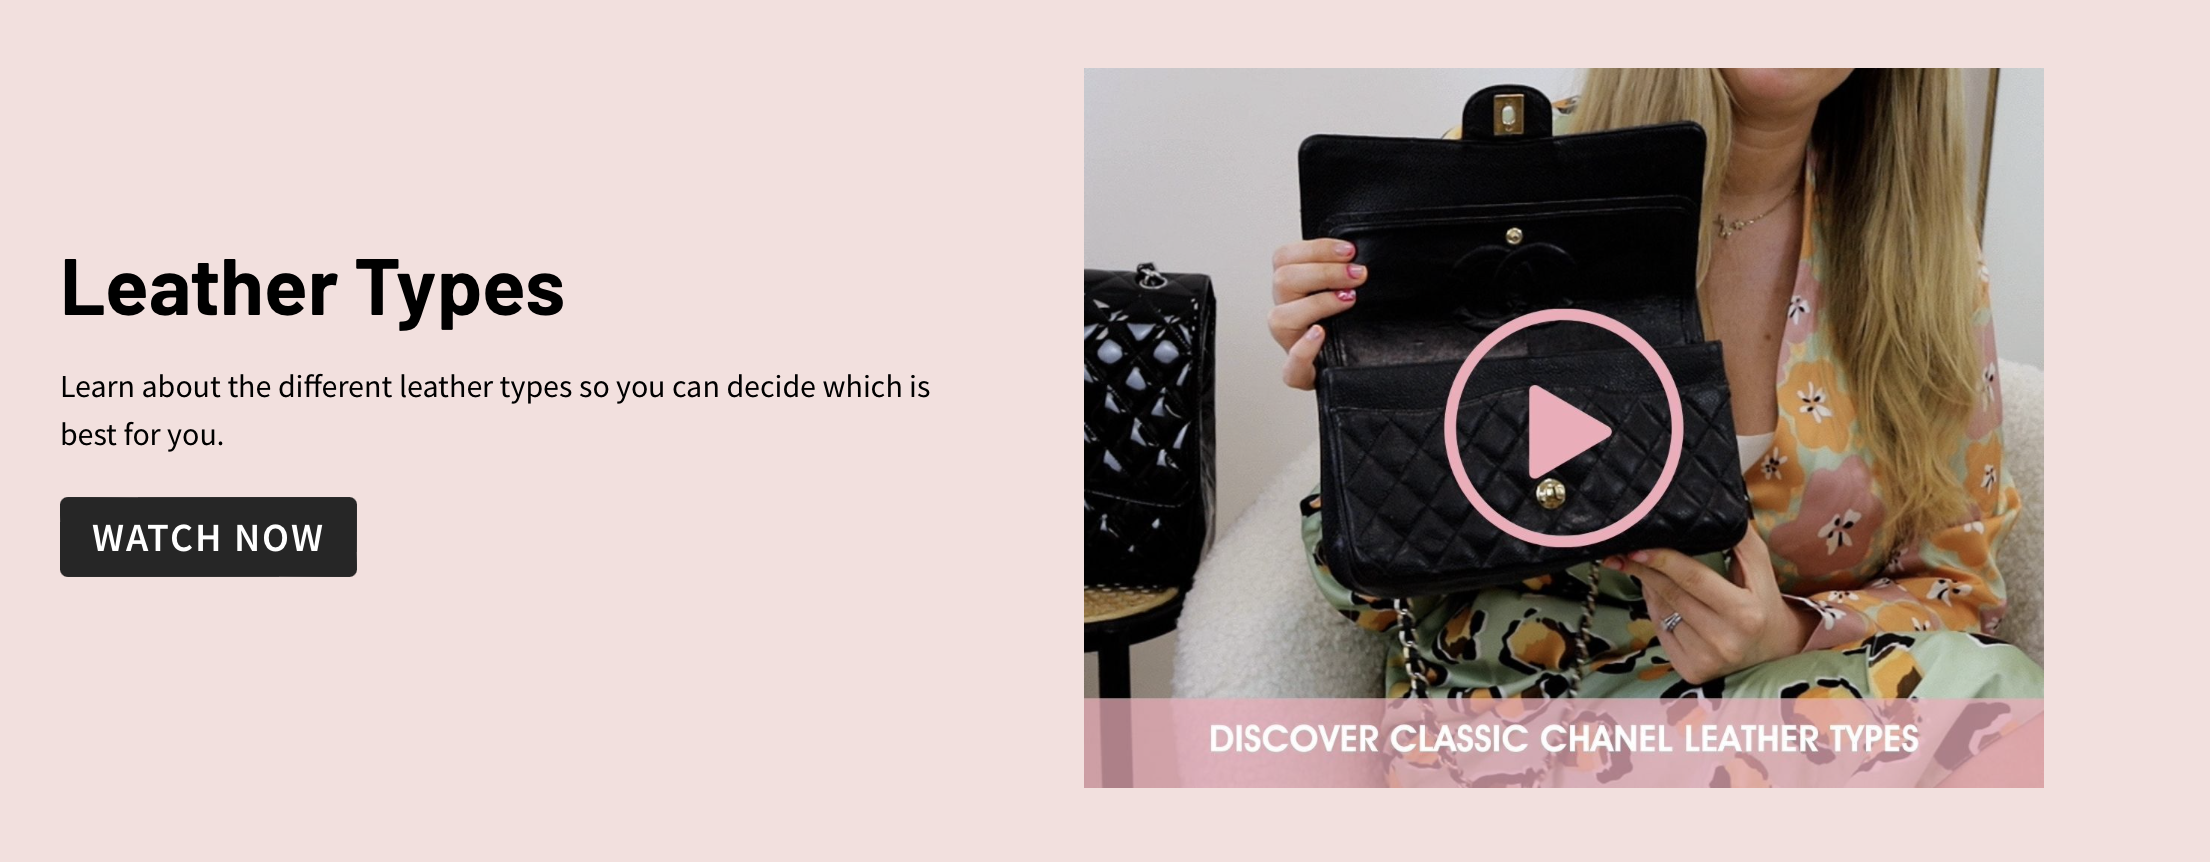 Discover the leather types of Classic Chanel's with The Handbag Clinic